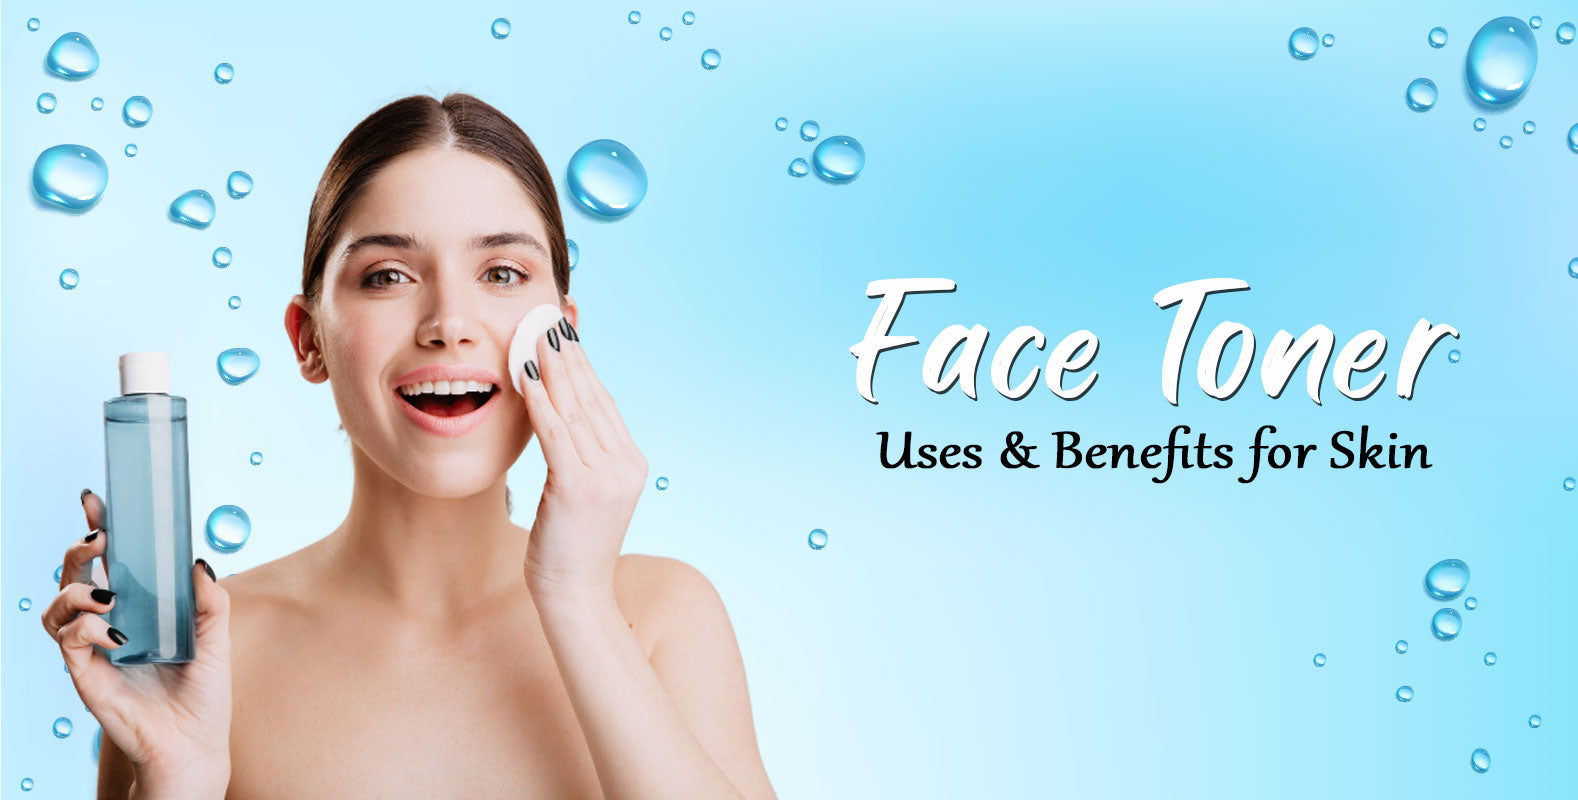 Face Toner: An Excellent Way To Detoxify Skin